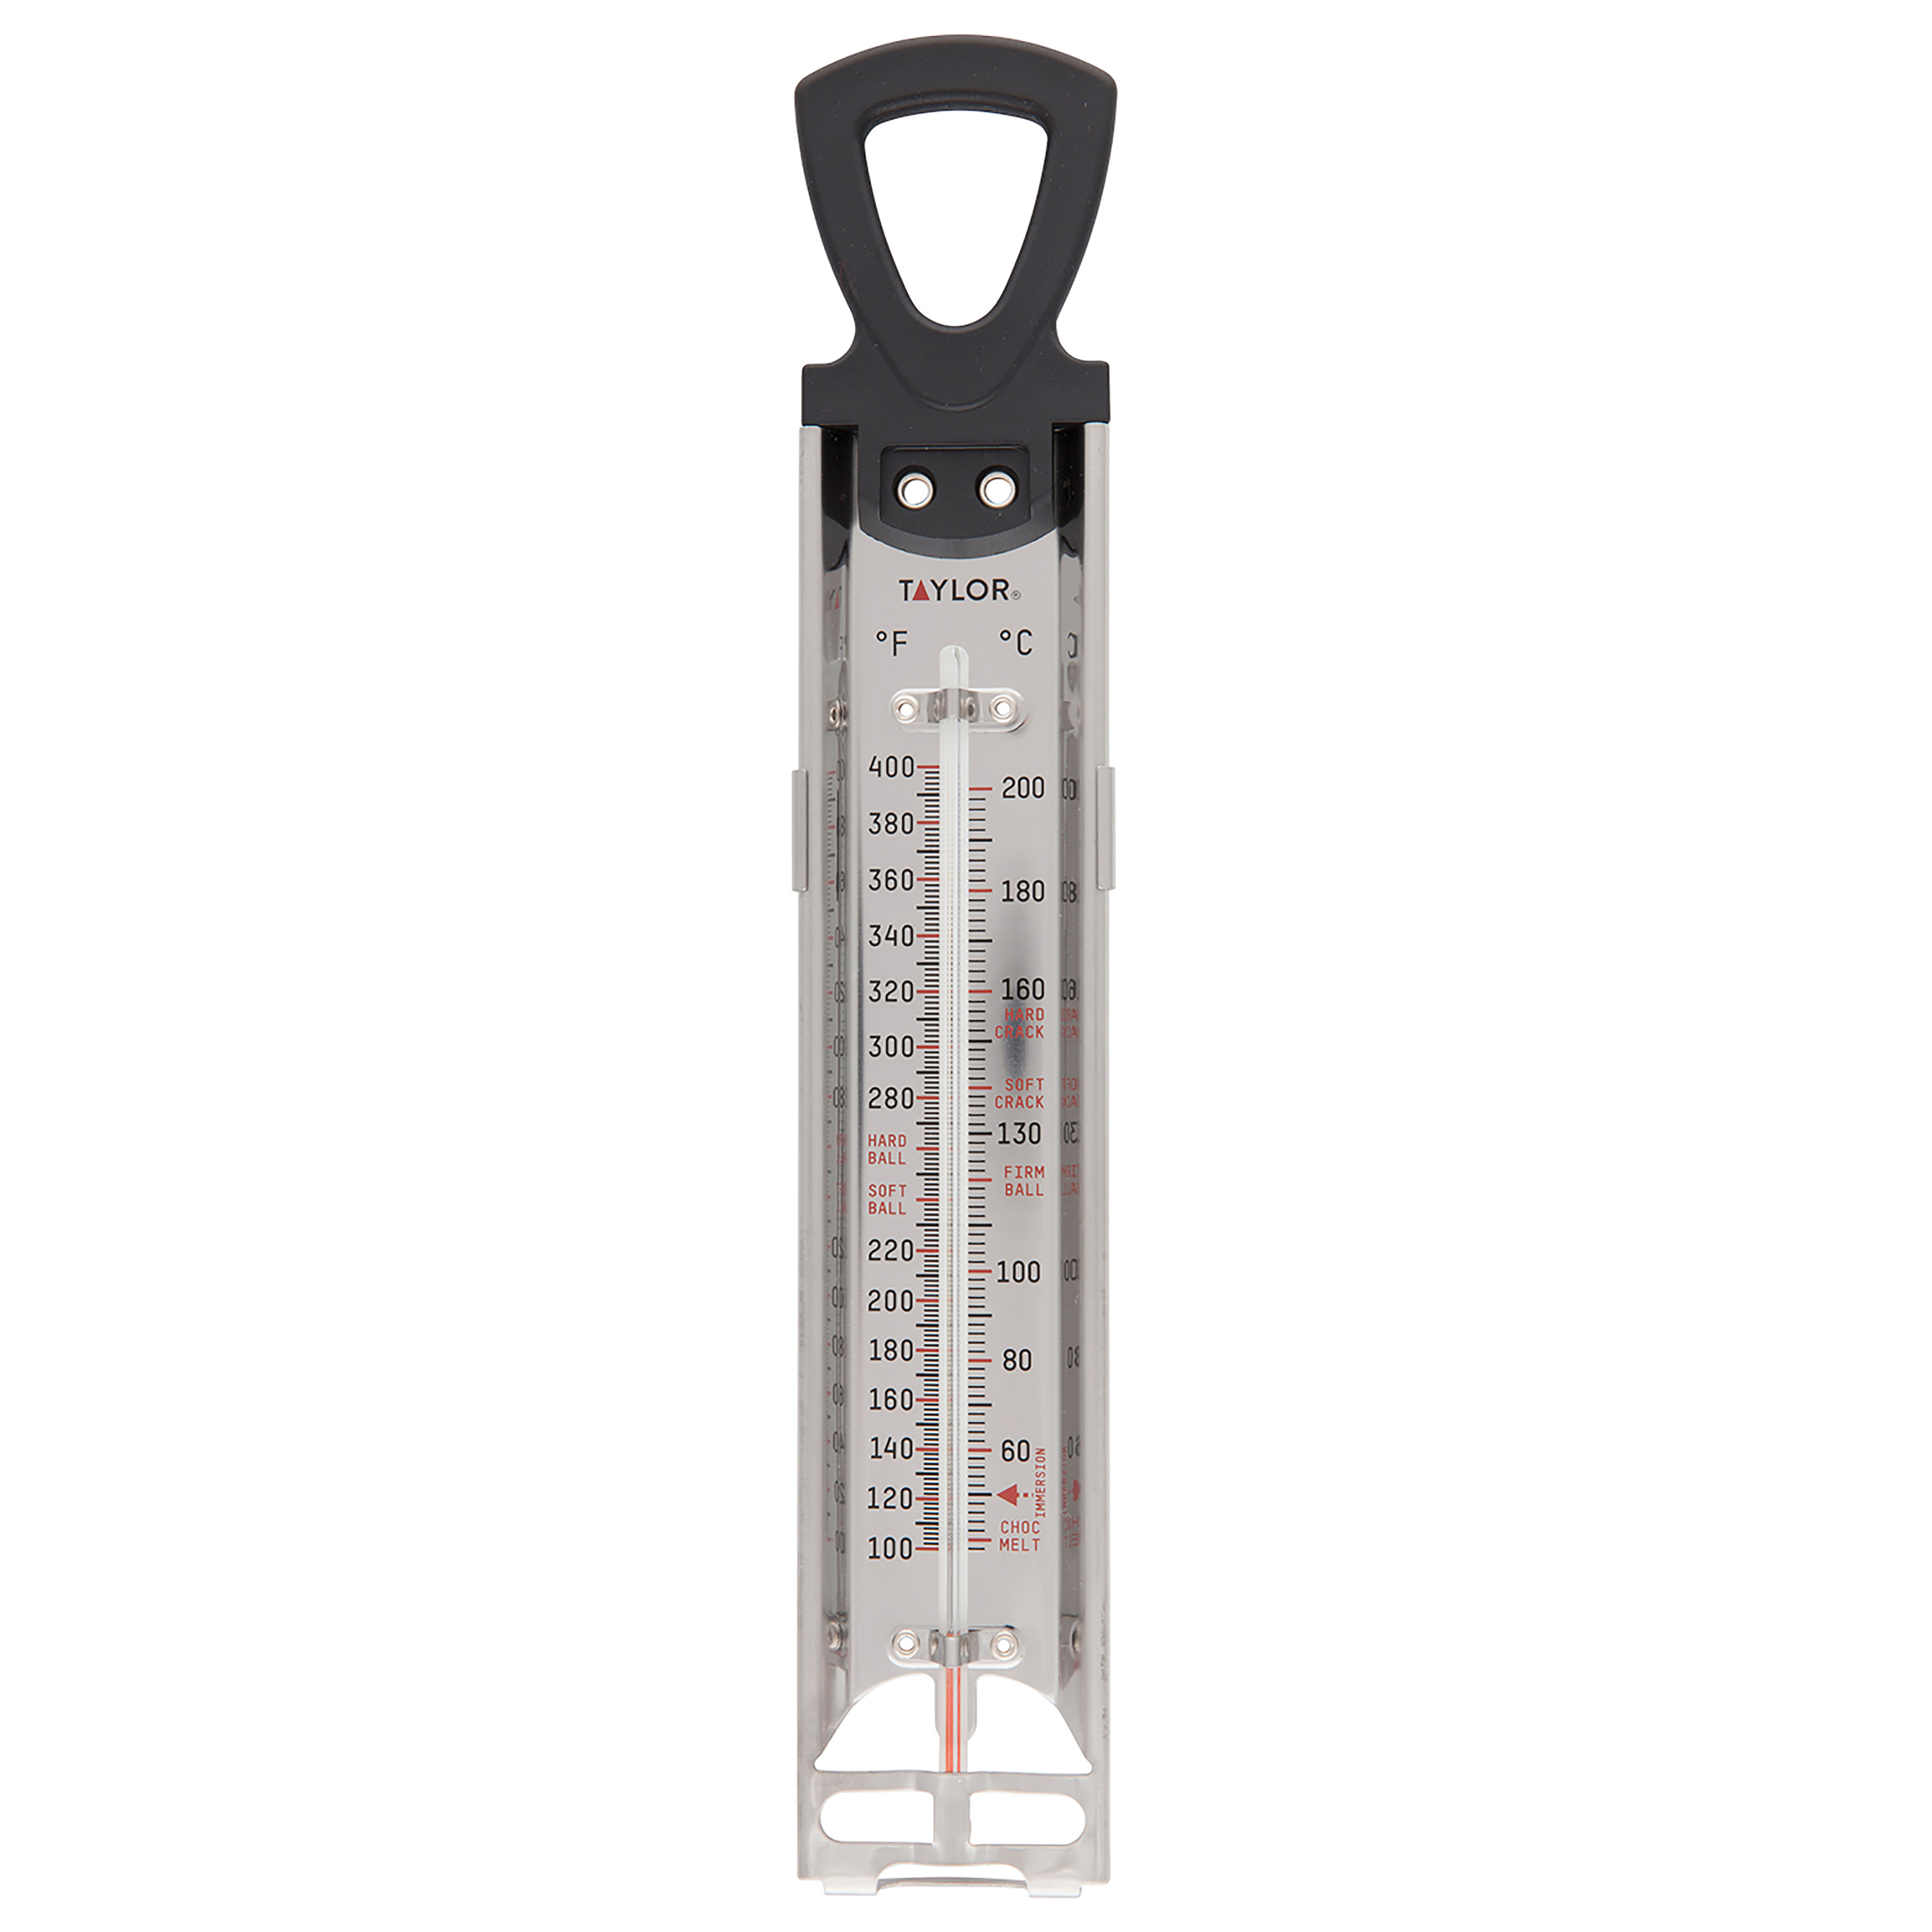 Taylor Candy and Deep Fry Thermometer with Adjustable Pan Clip - image 1 of 6